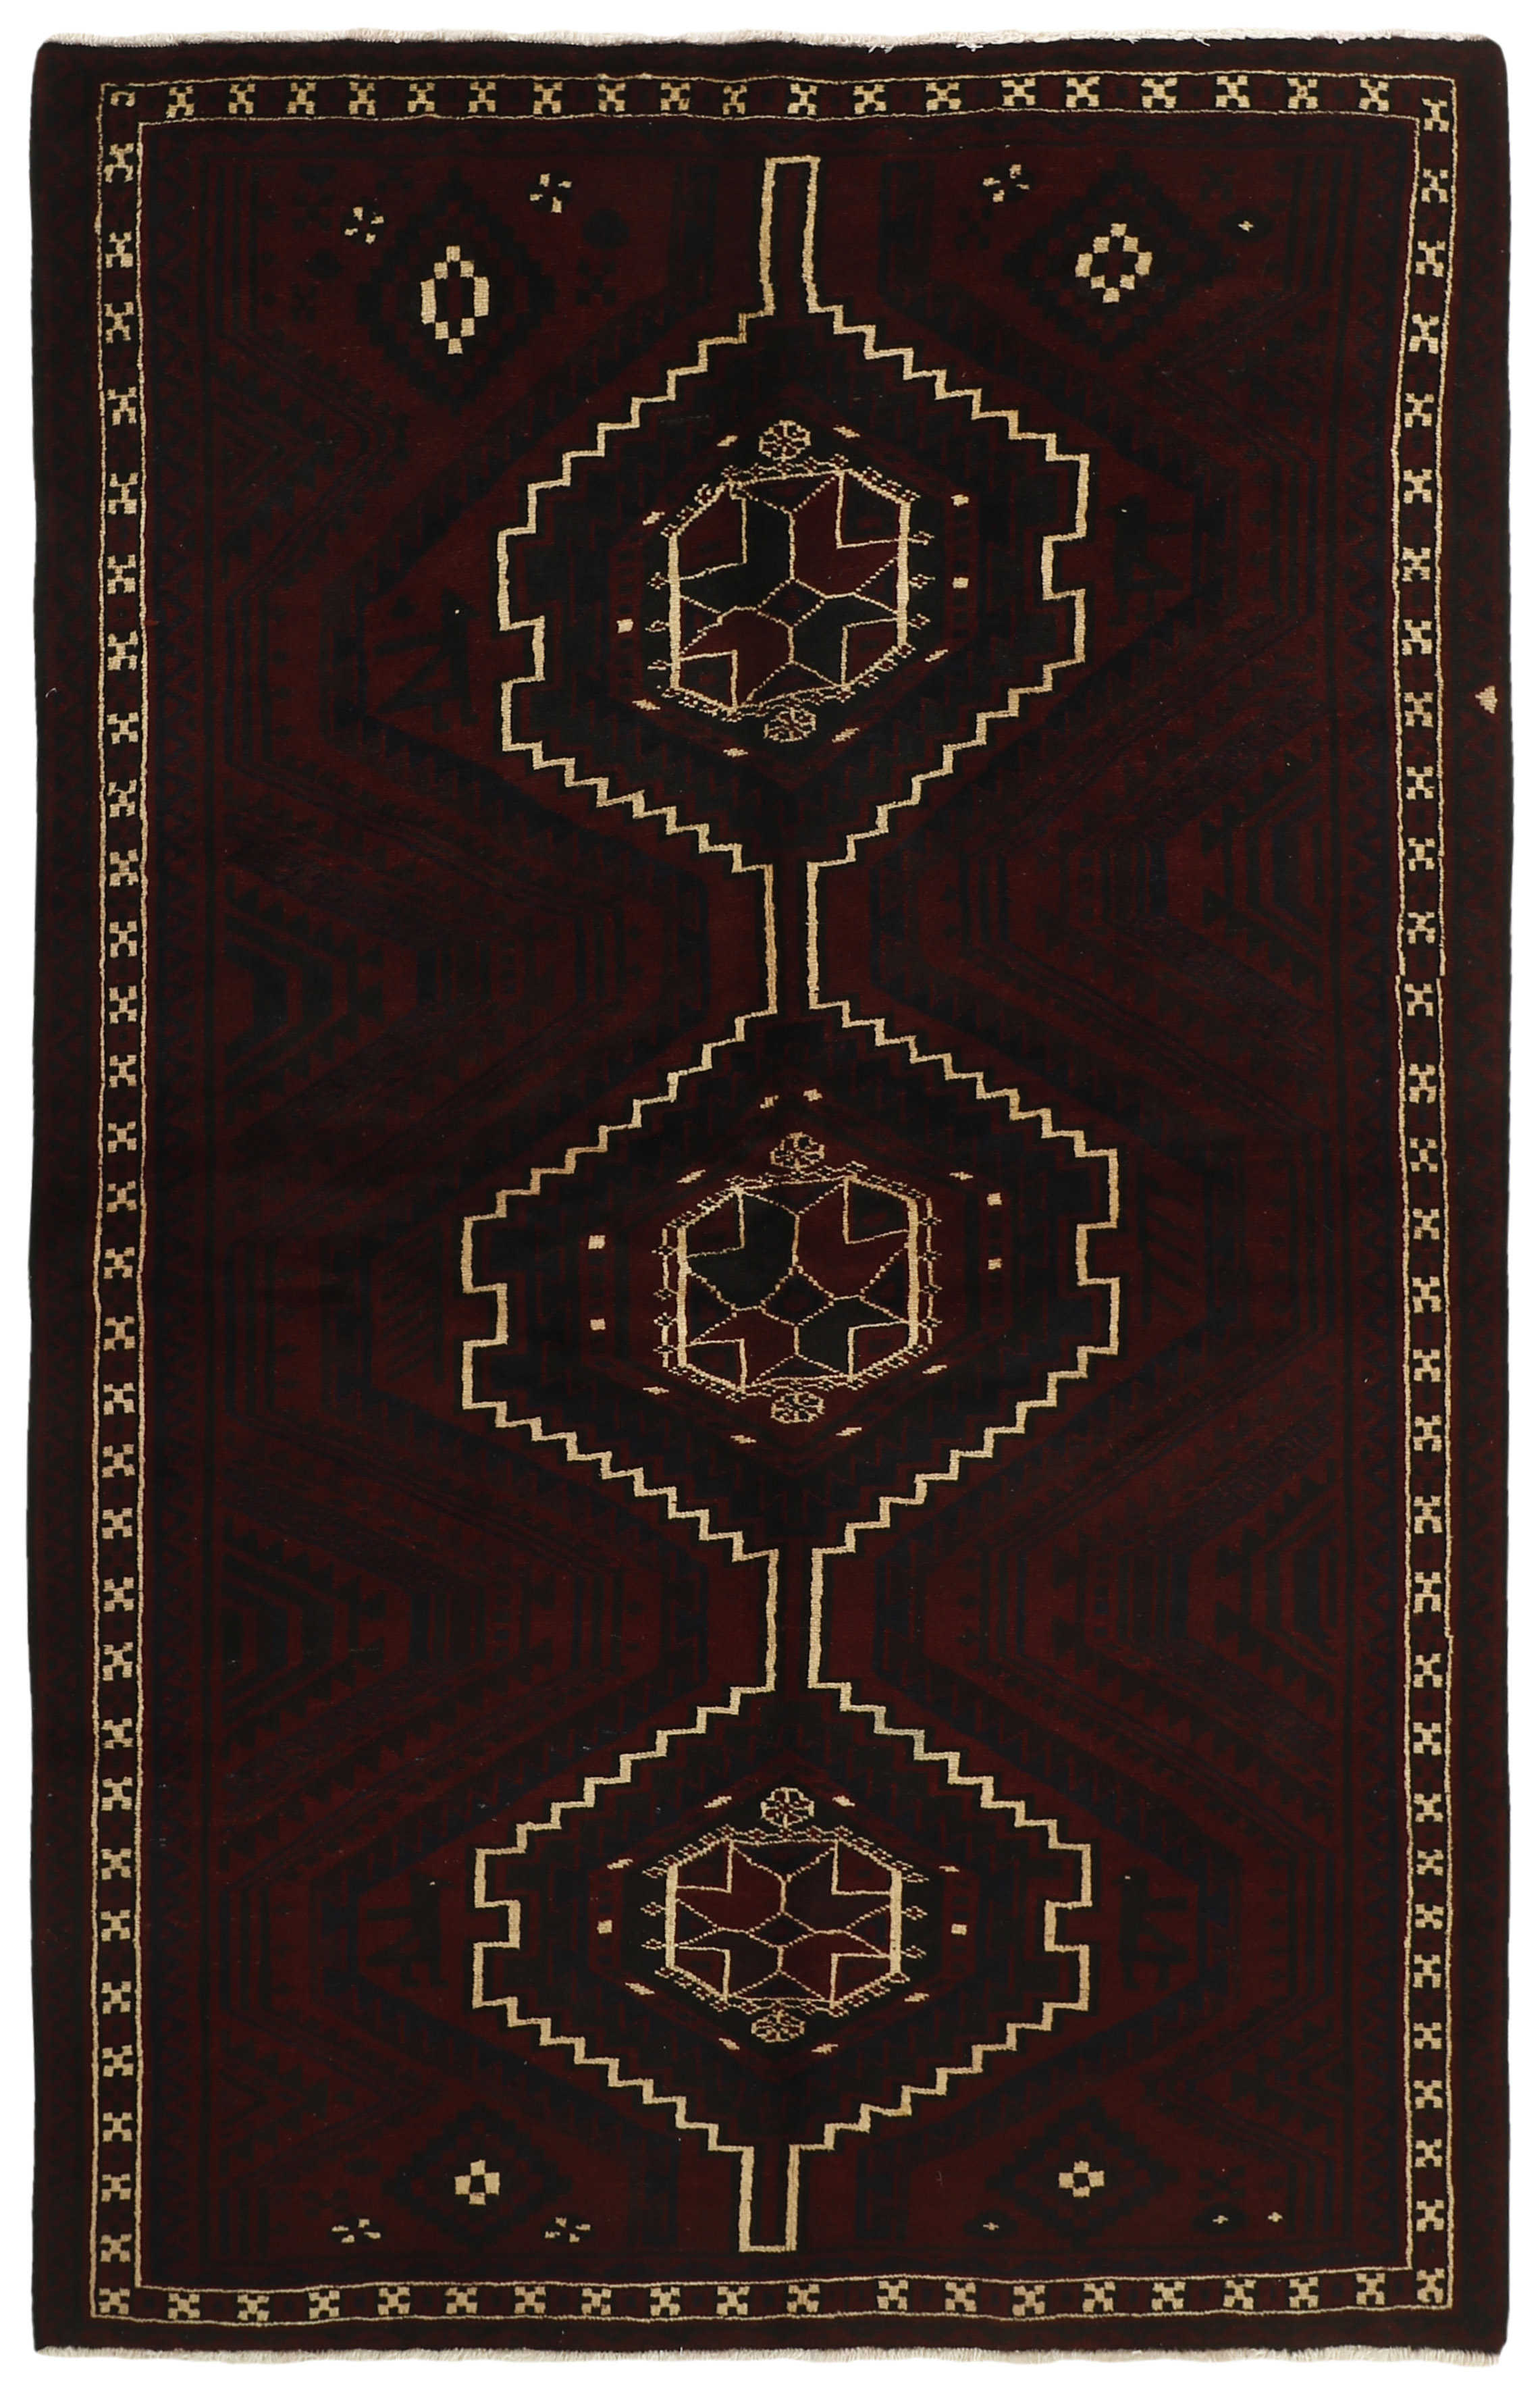 Red and white persian rug with traditional tribal geometric pattern